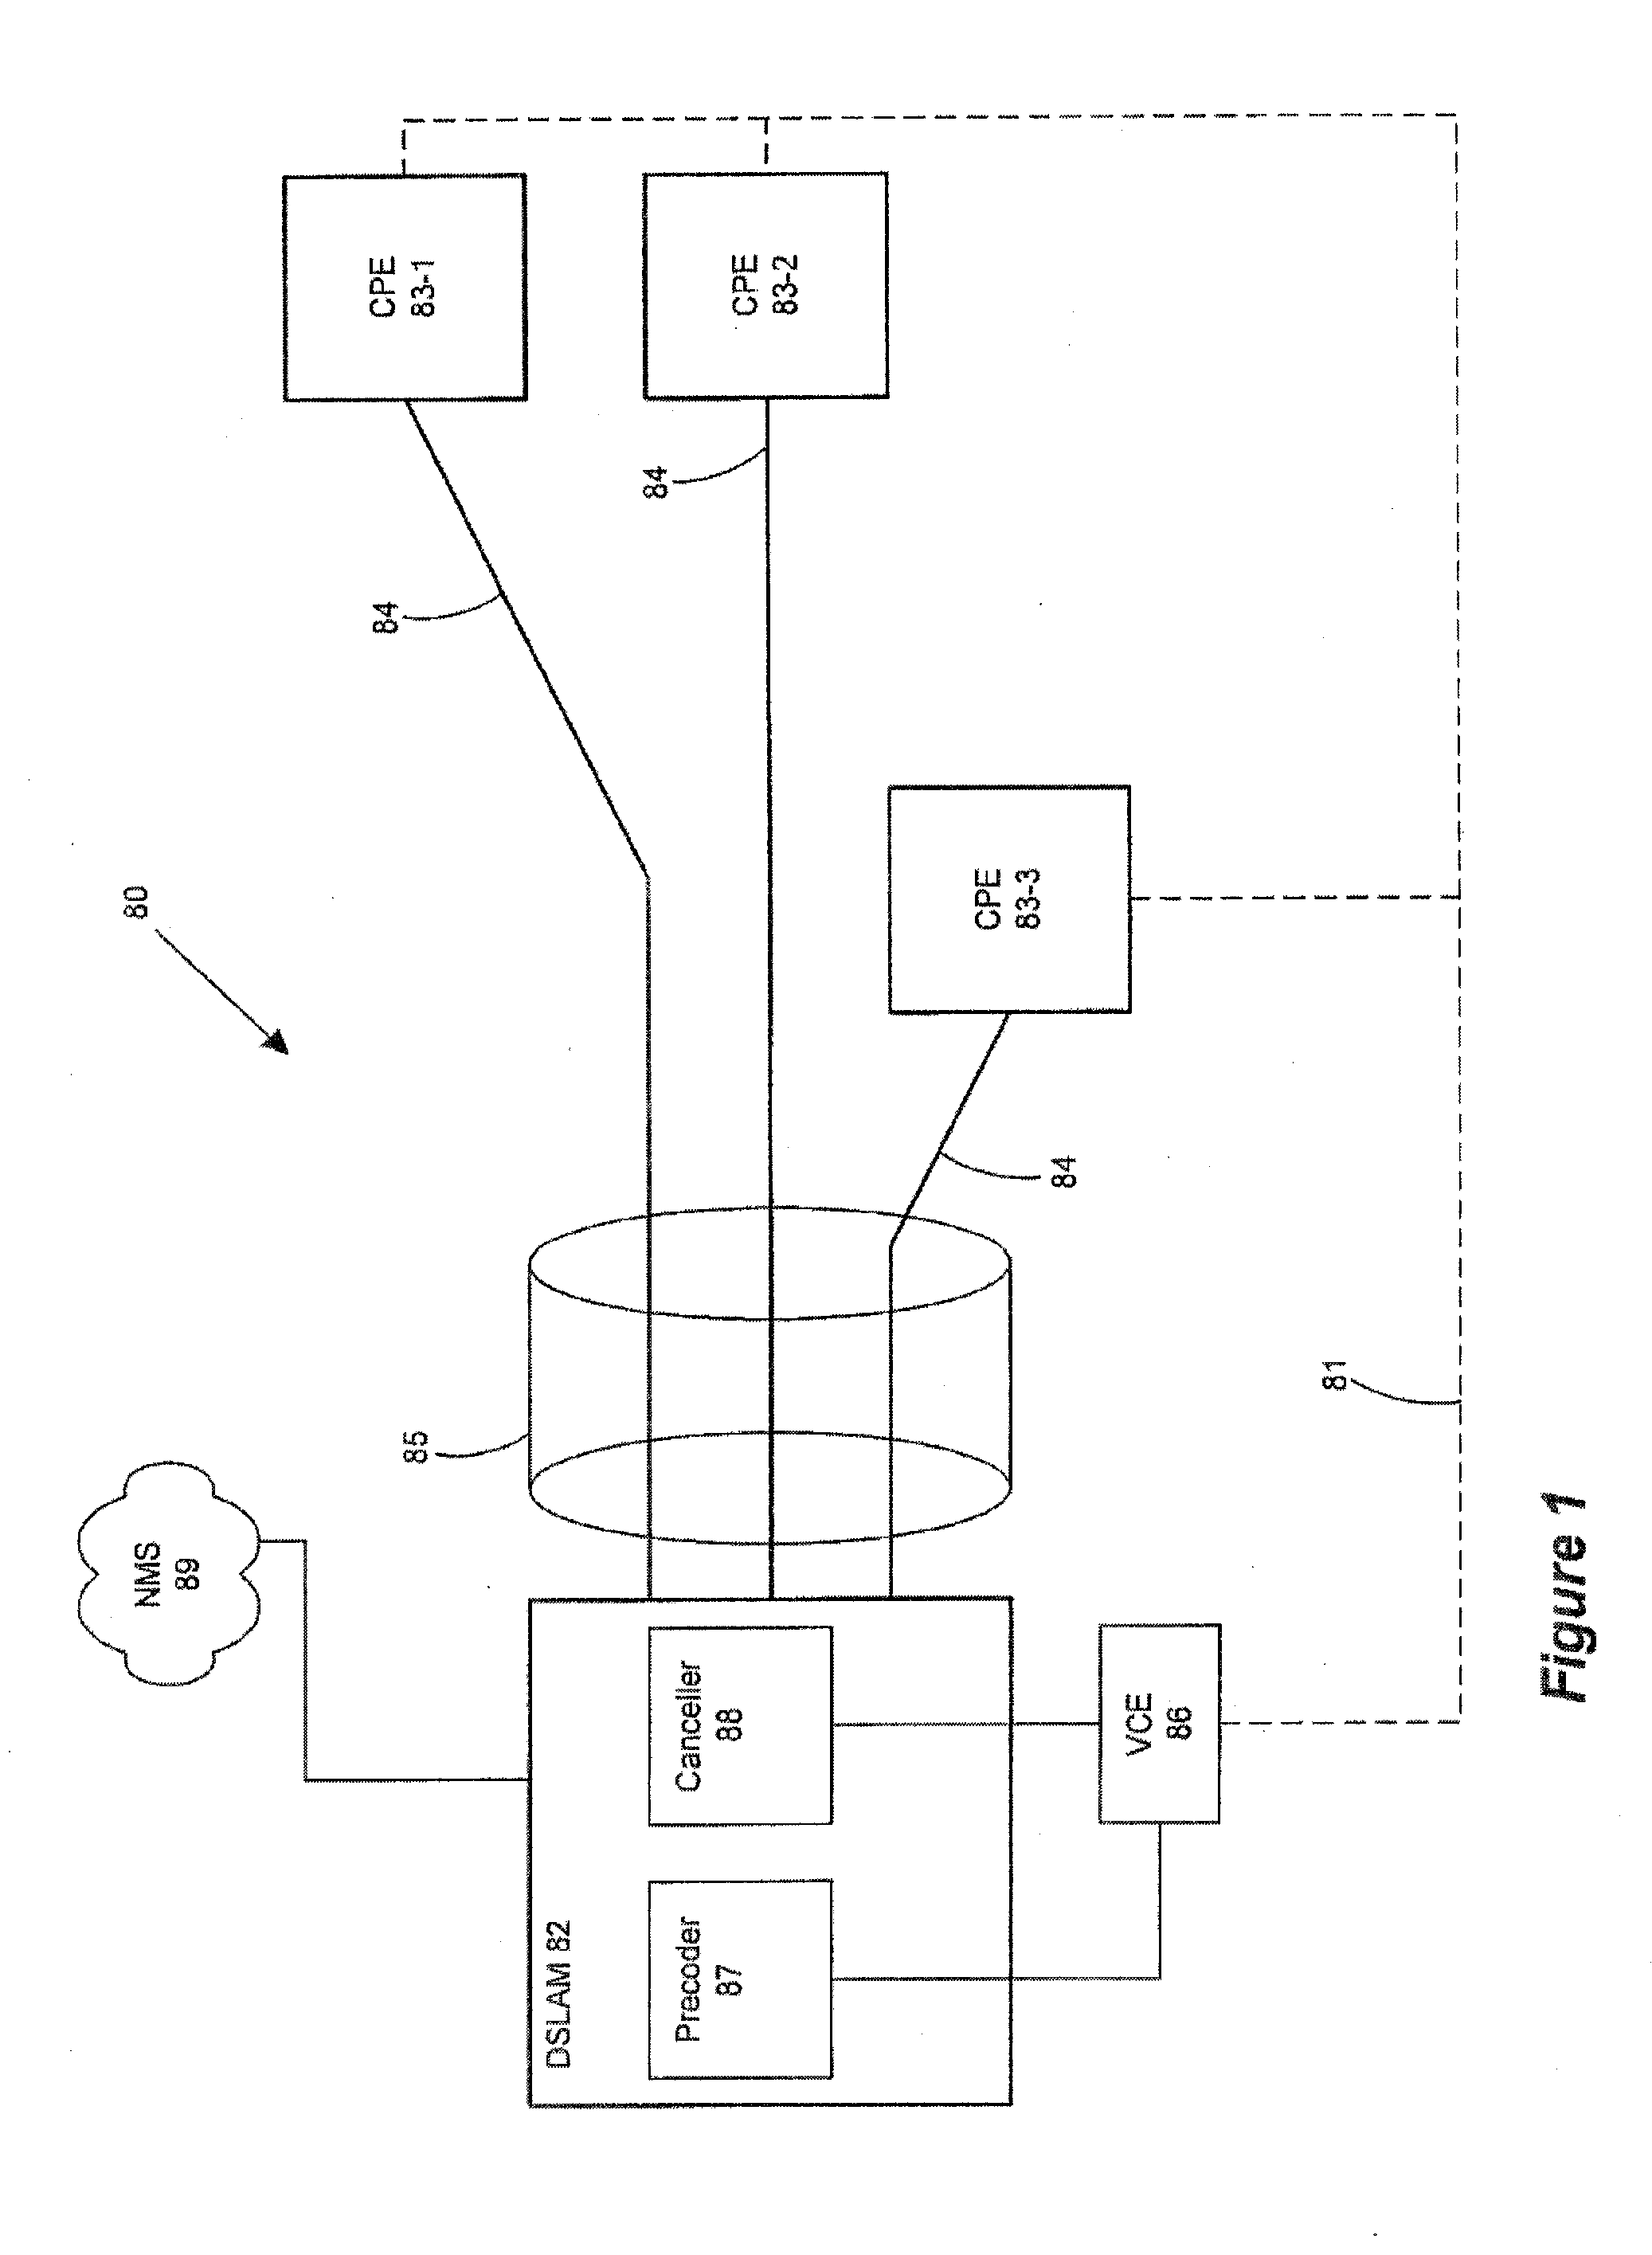 System and Method for Selecting Parameters for Compressing Coefficients for Nodescale Vectoring